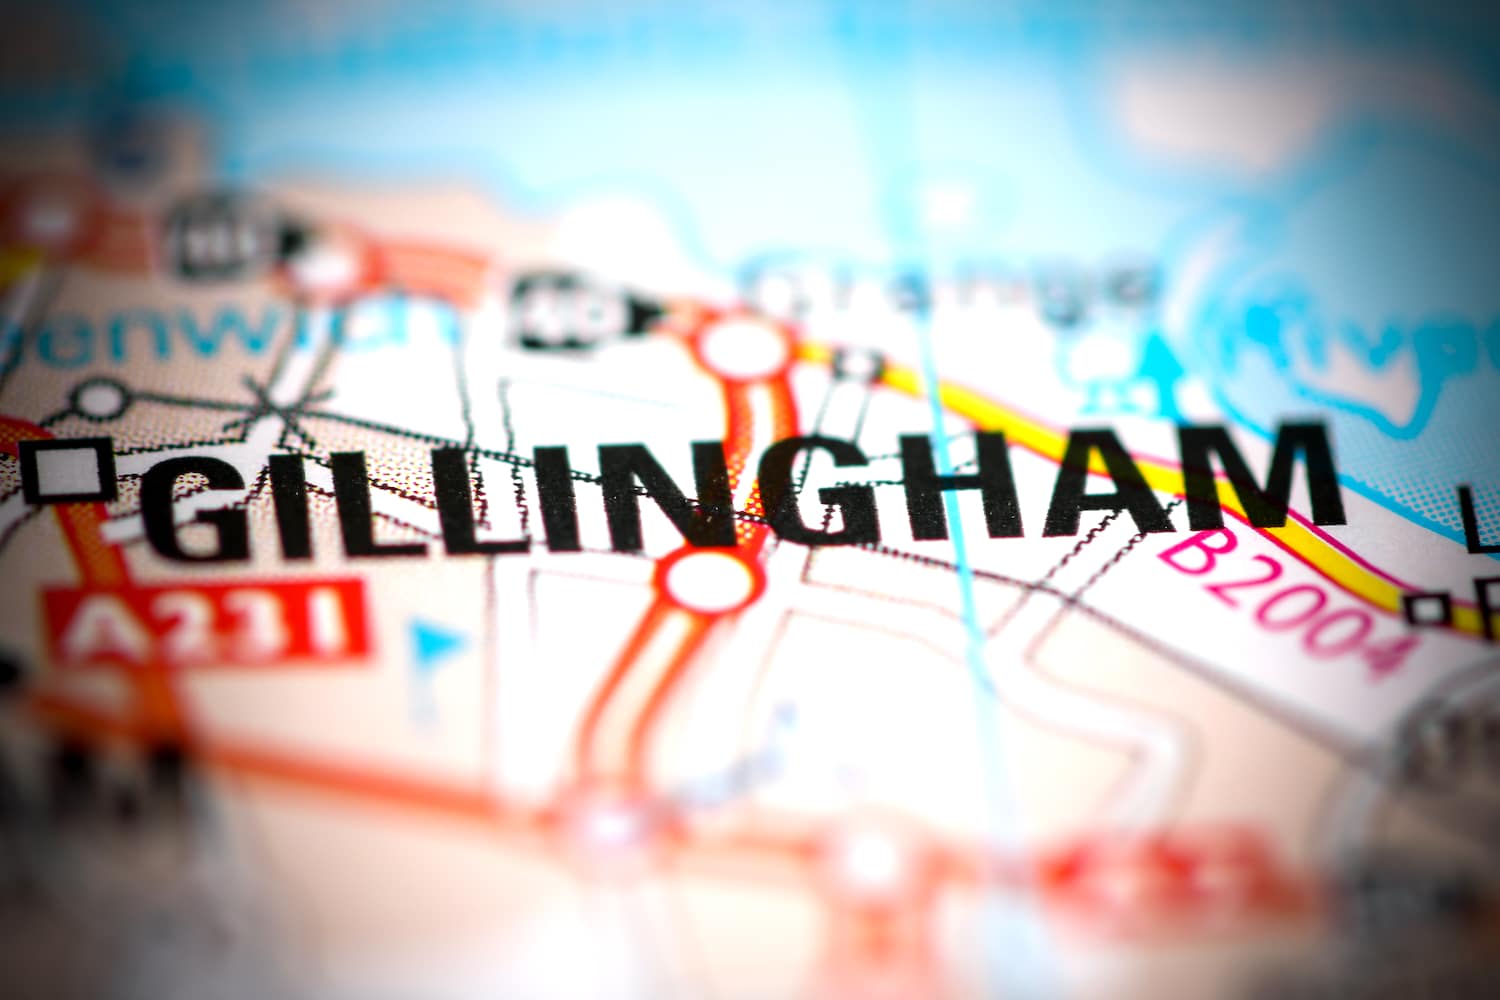 10 Top things to do in Gillingham. Image shows map highlighting Gillingham.